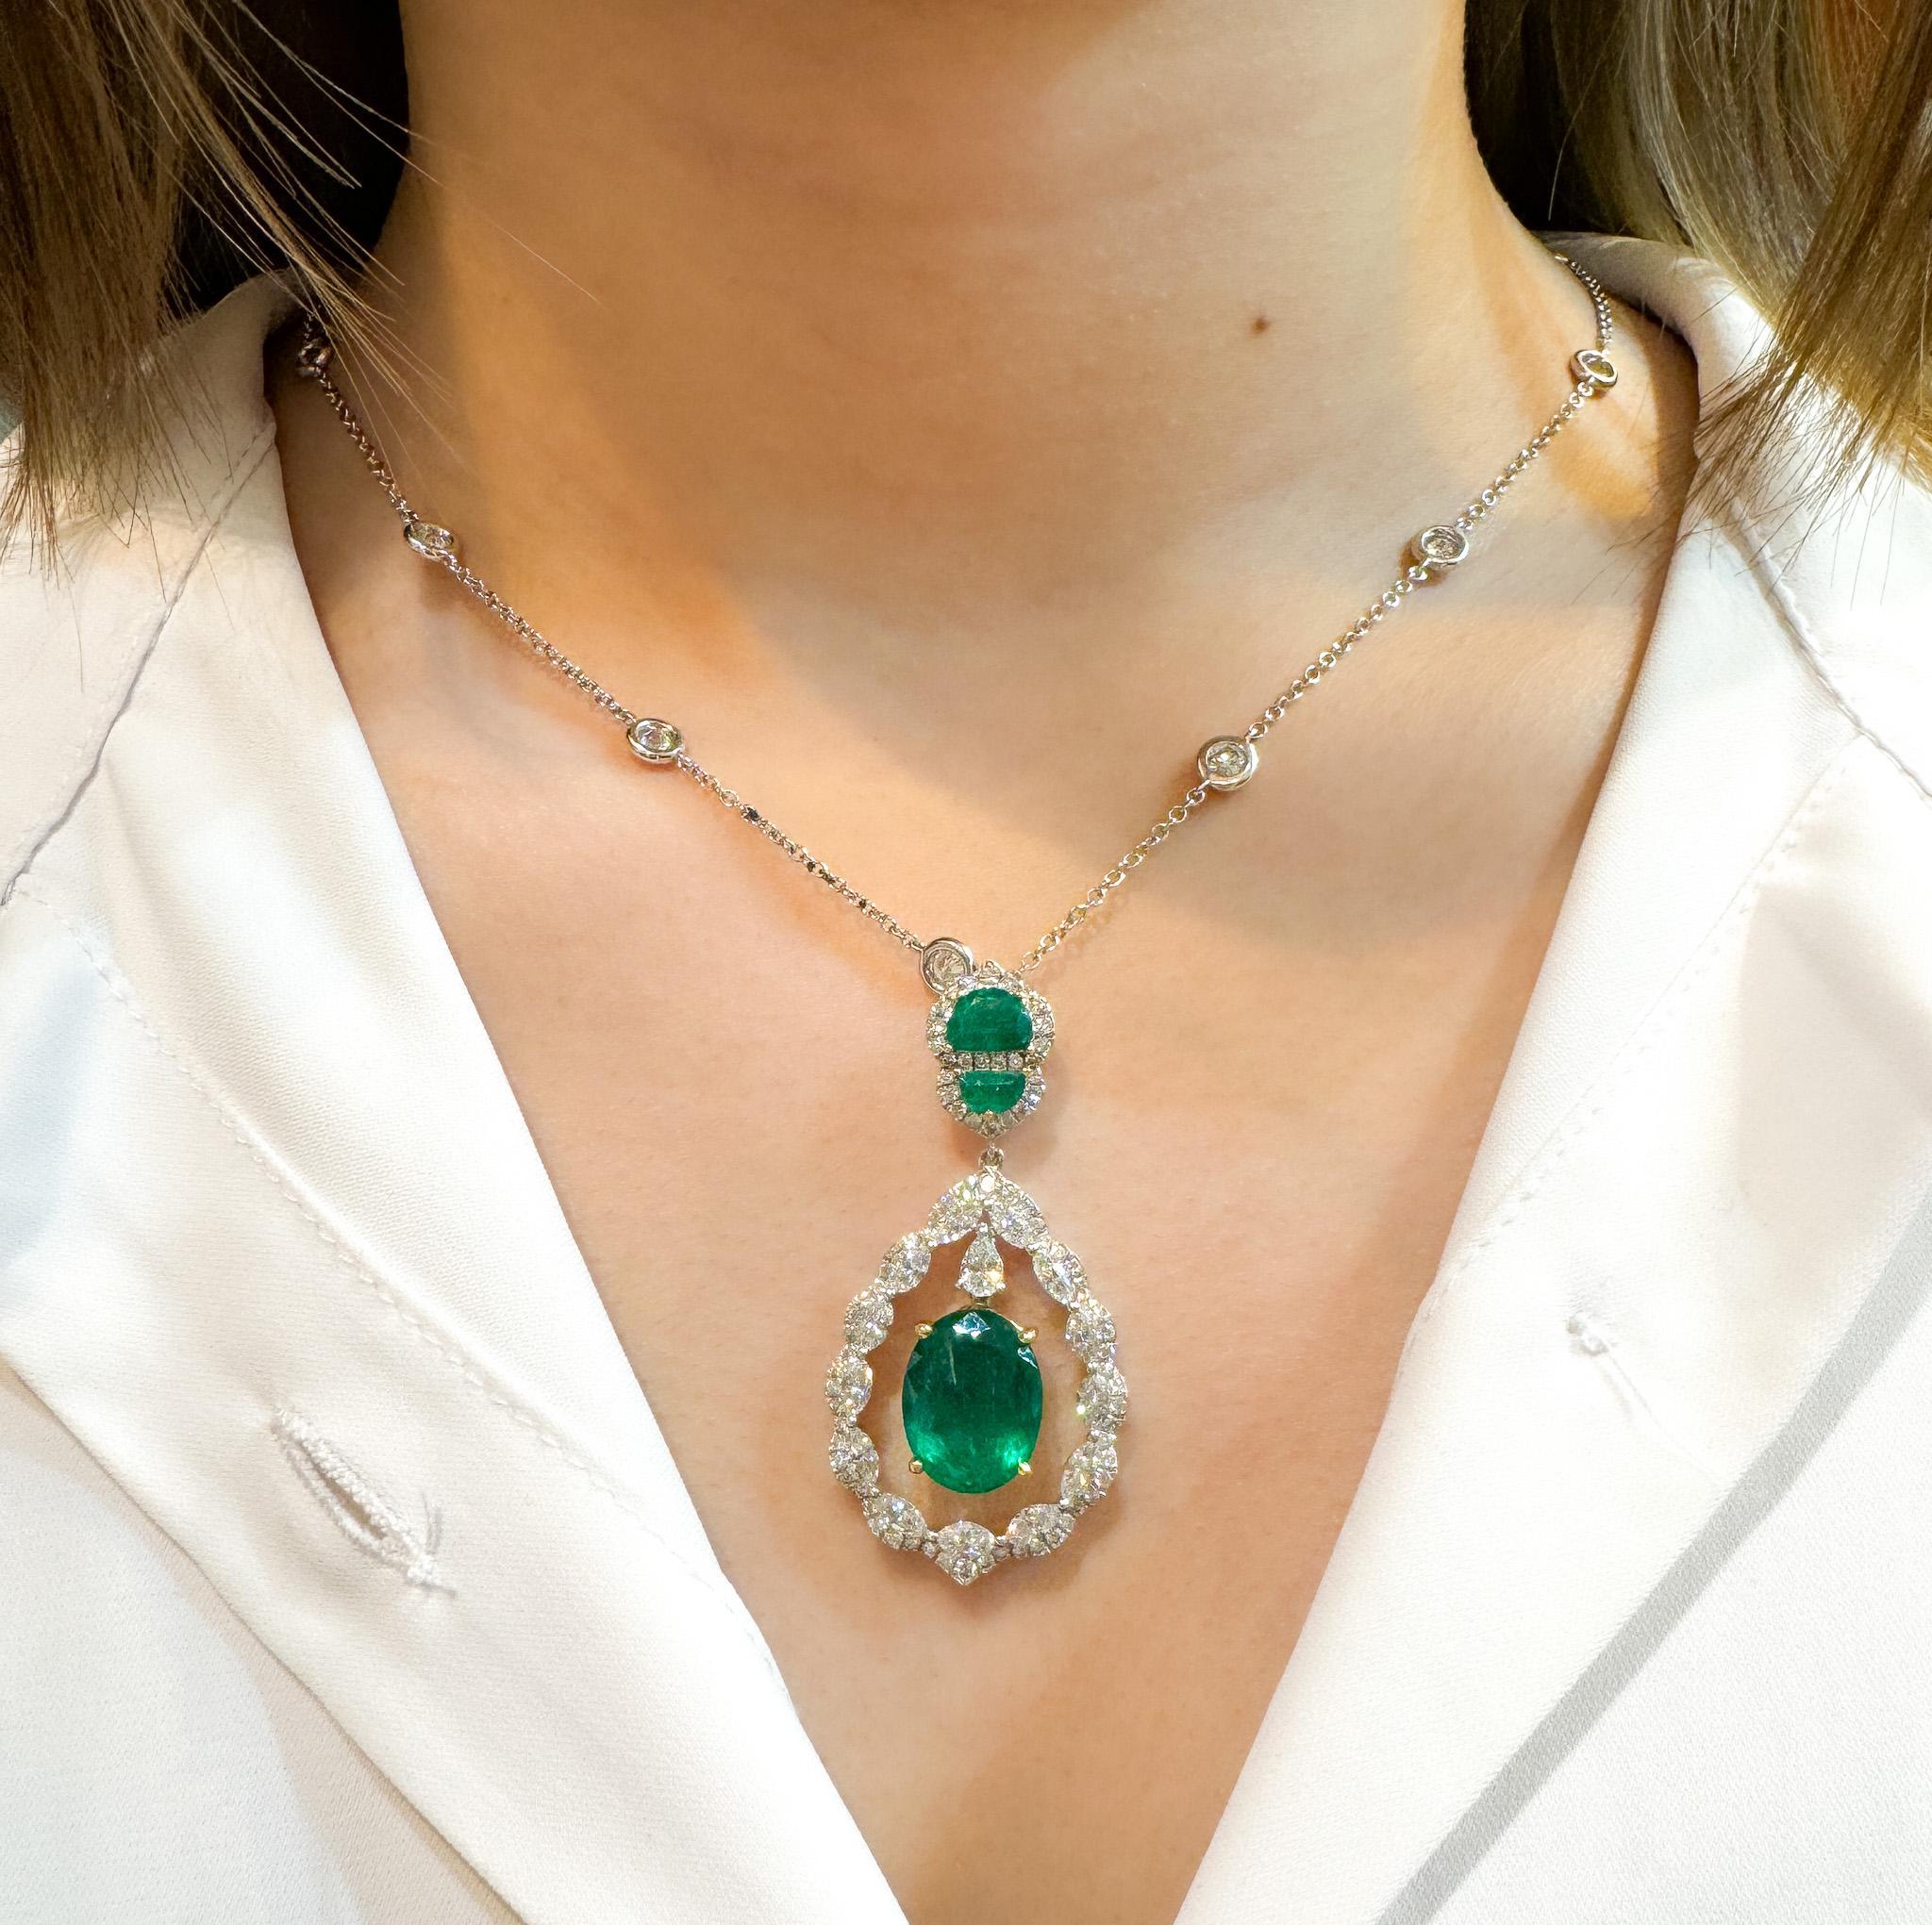 The natural oval-cut emerald center stone weighs 6.42 carats and features a floating design. It is paired with a halo of 13 marquise-cut white diamonds weighing 1.67 carats total, 1 drop-cut white diamond weighing 0.21 carats, and 80 round-cut white